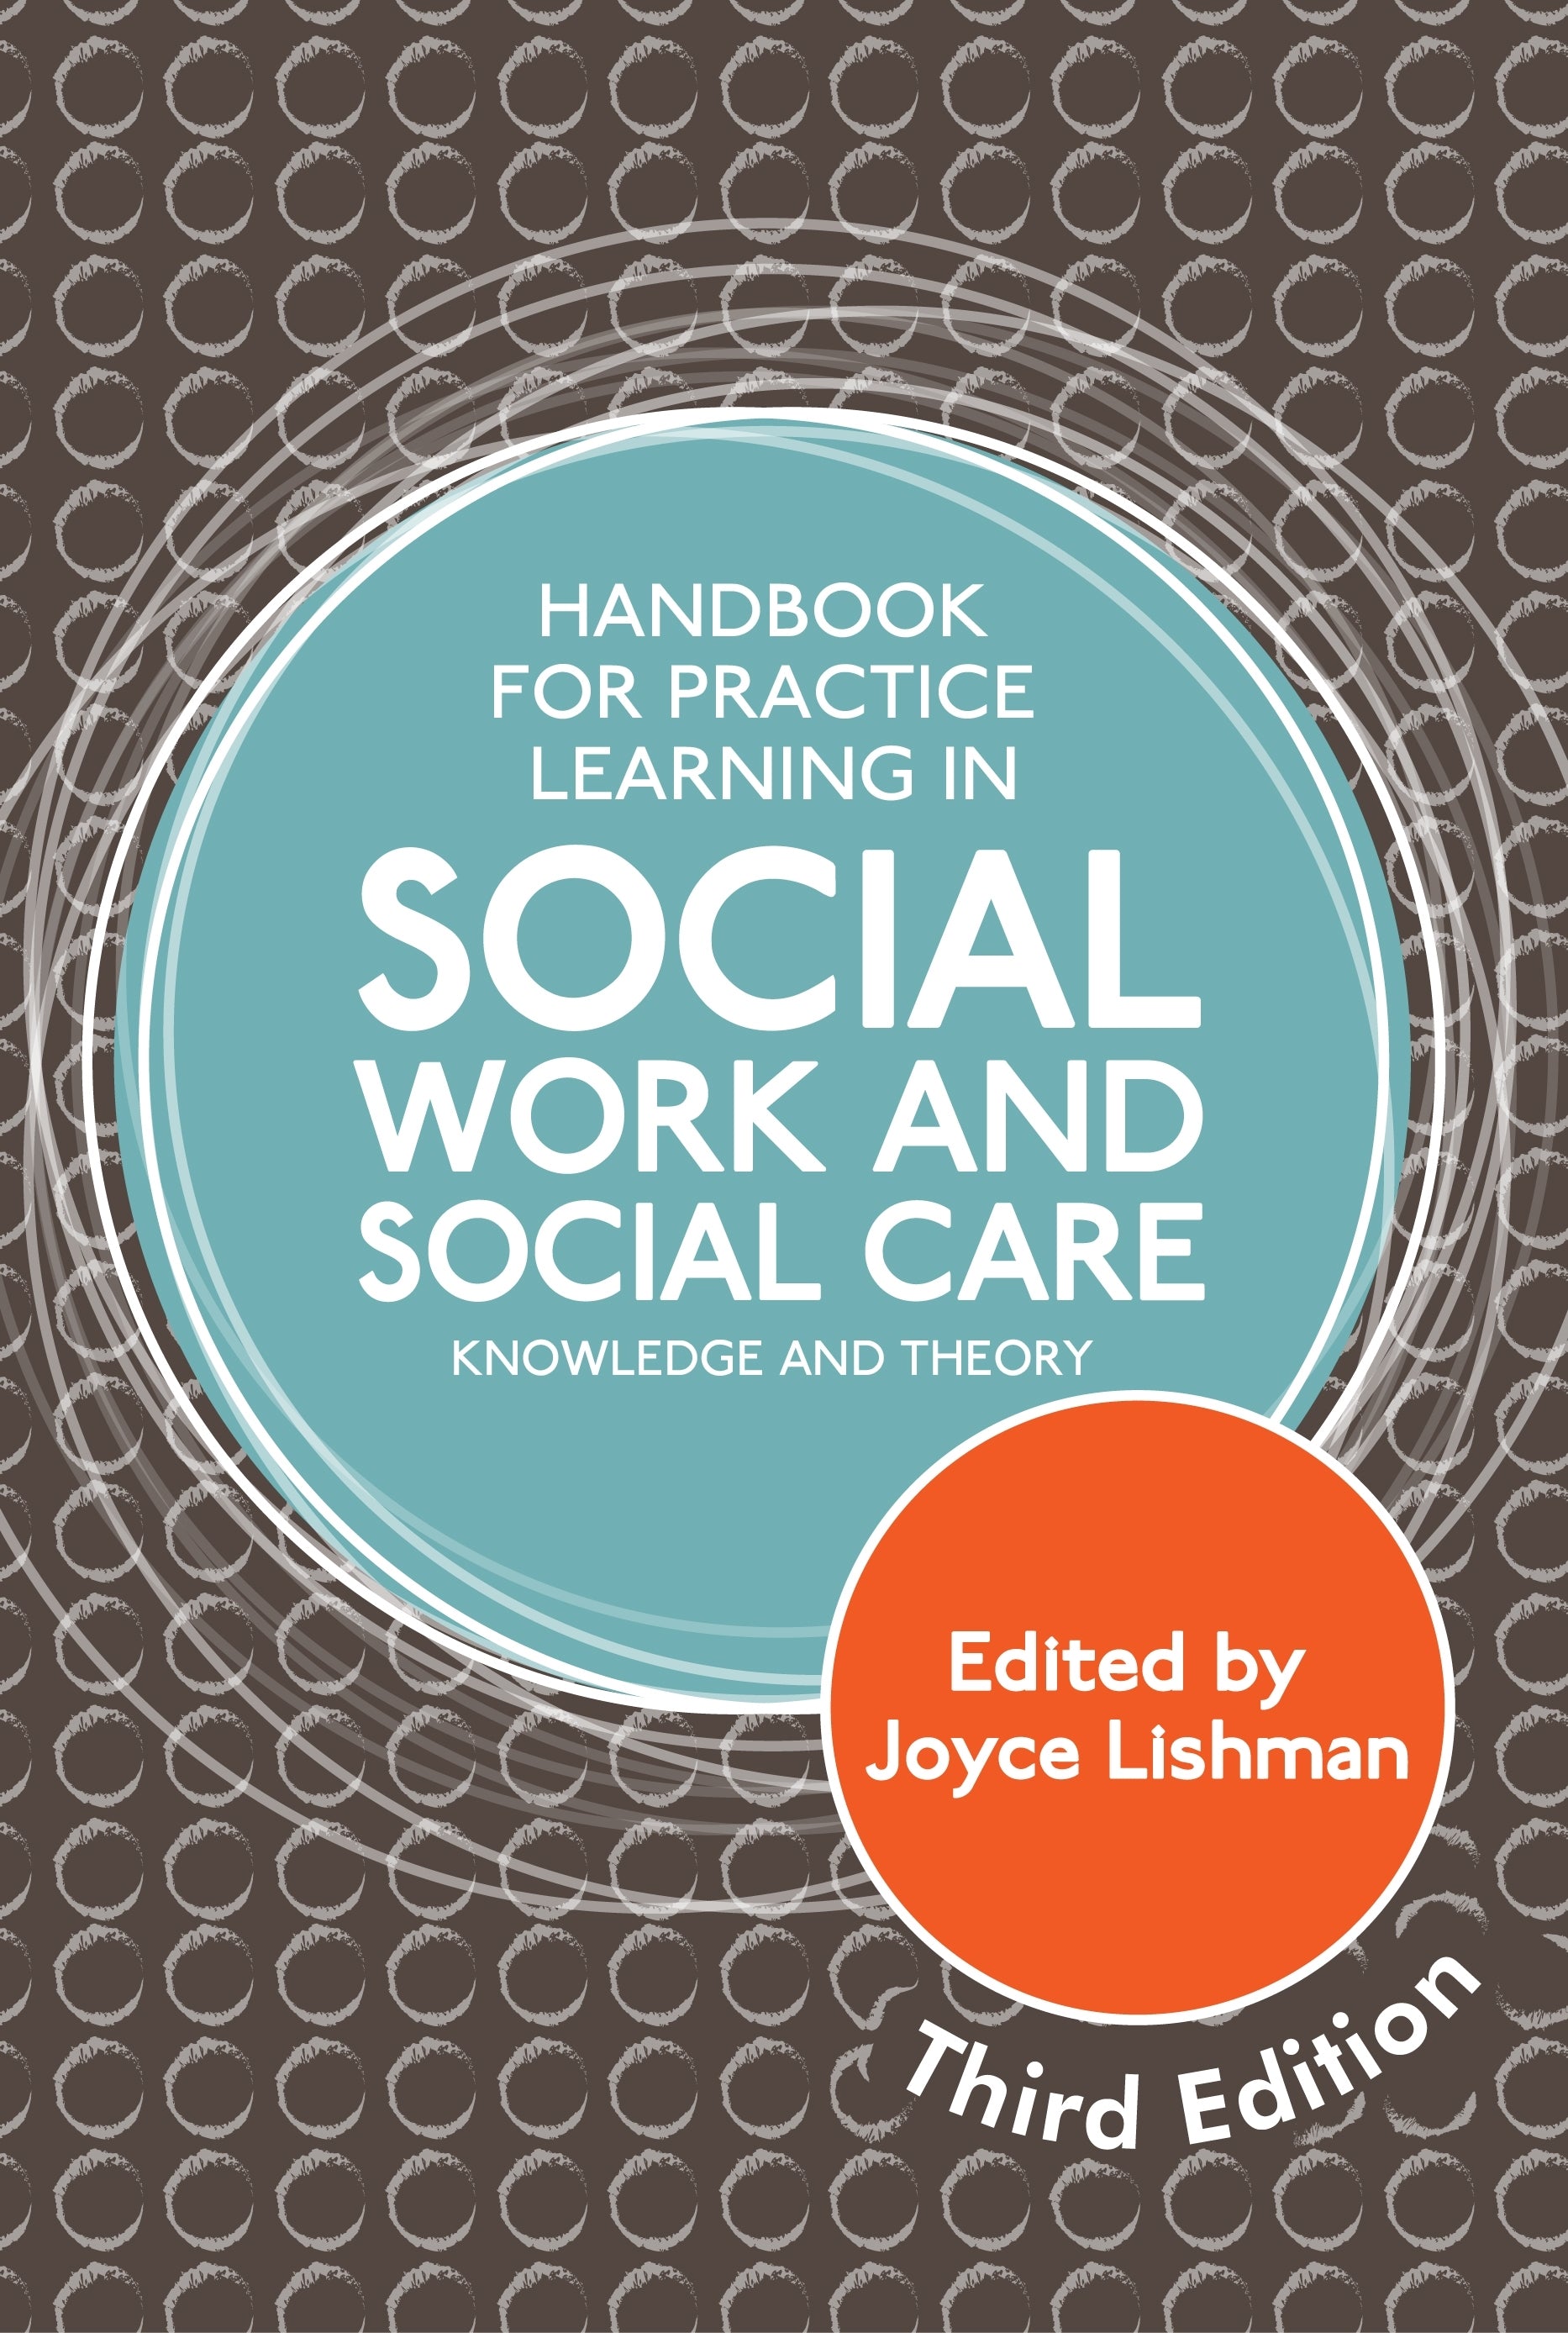 Handbook for Practice Learning in Social Work and Social Care, Third Edition by Joyce Lishman, No Author Listed